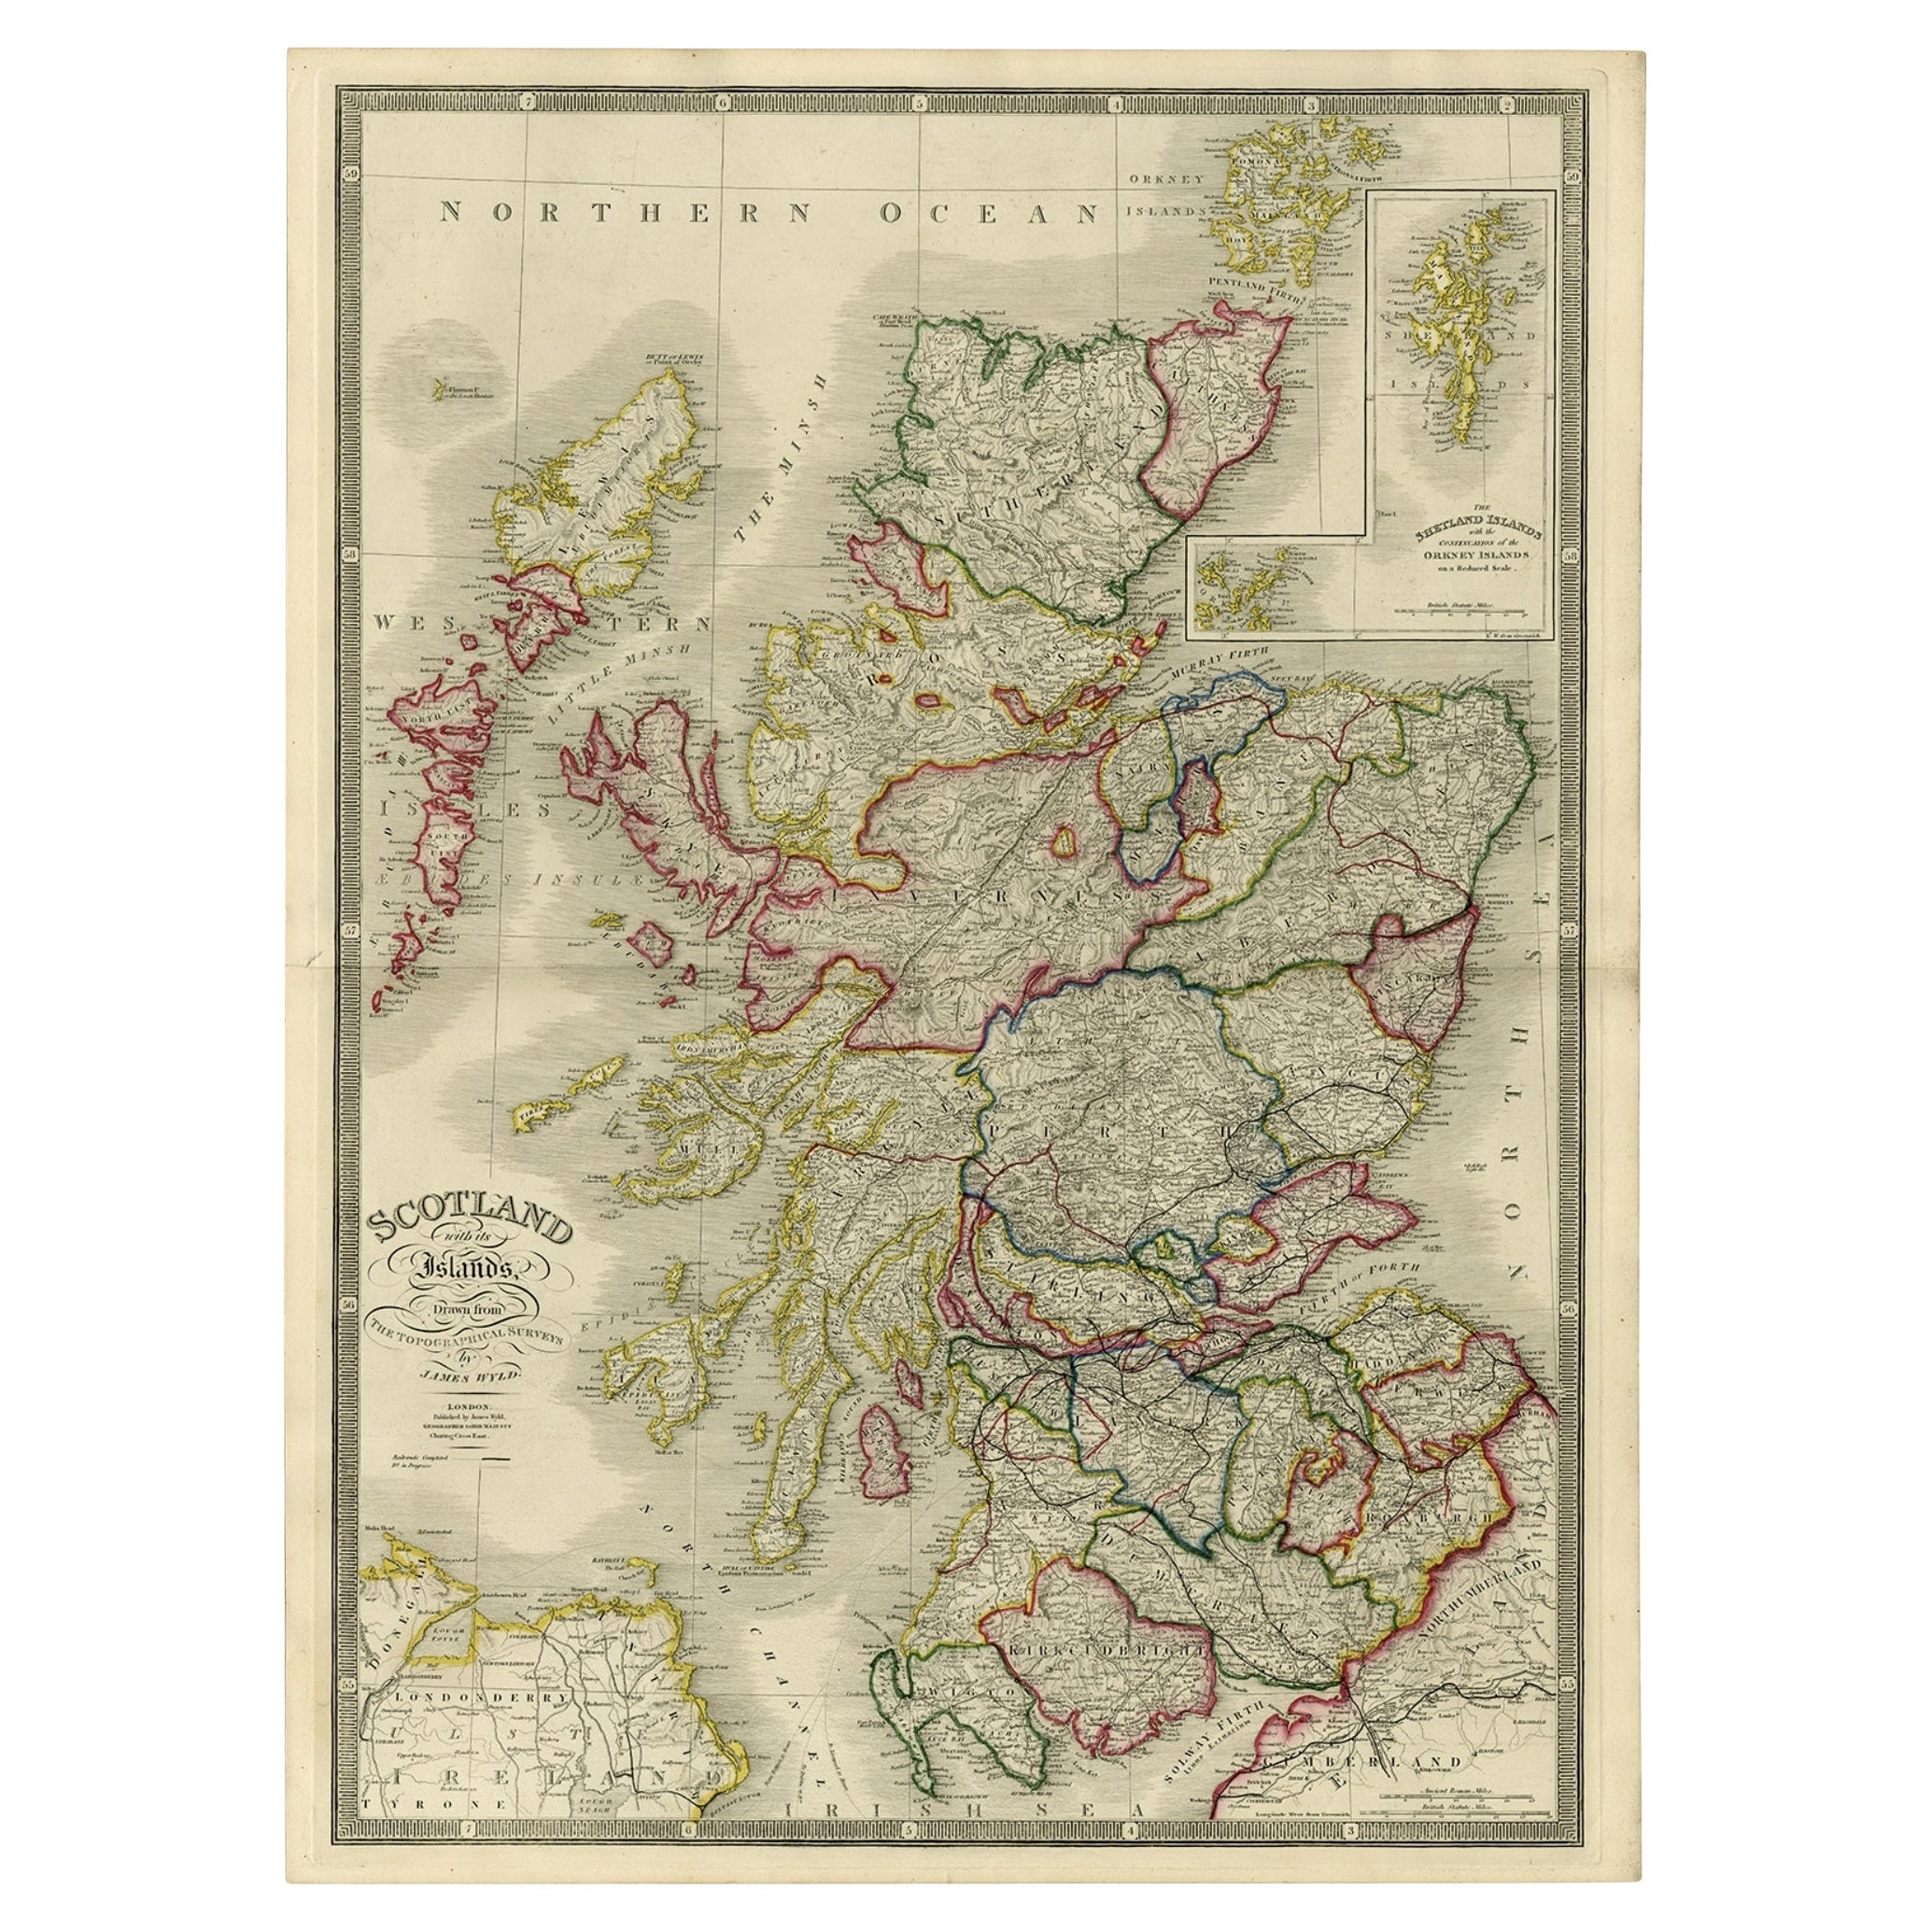 Antique Map of Scotland With an Inset Map of the Shetland Islands, 1854